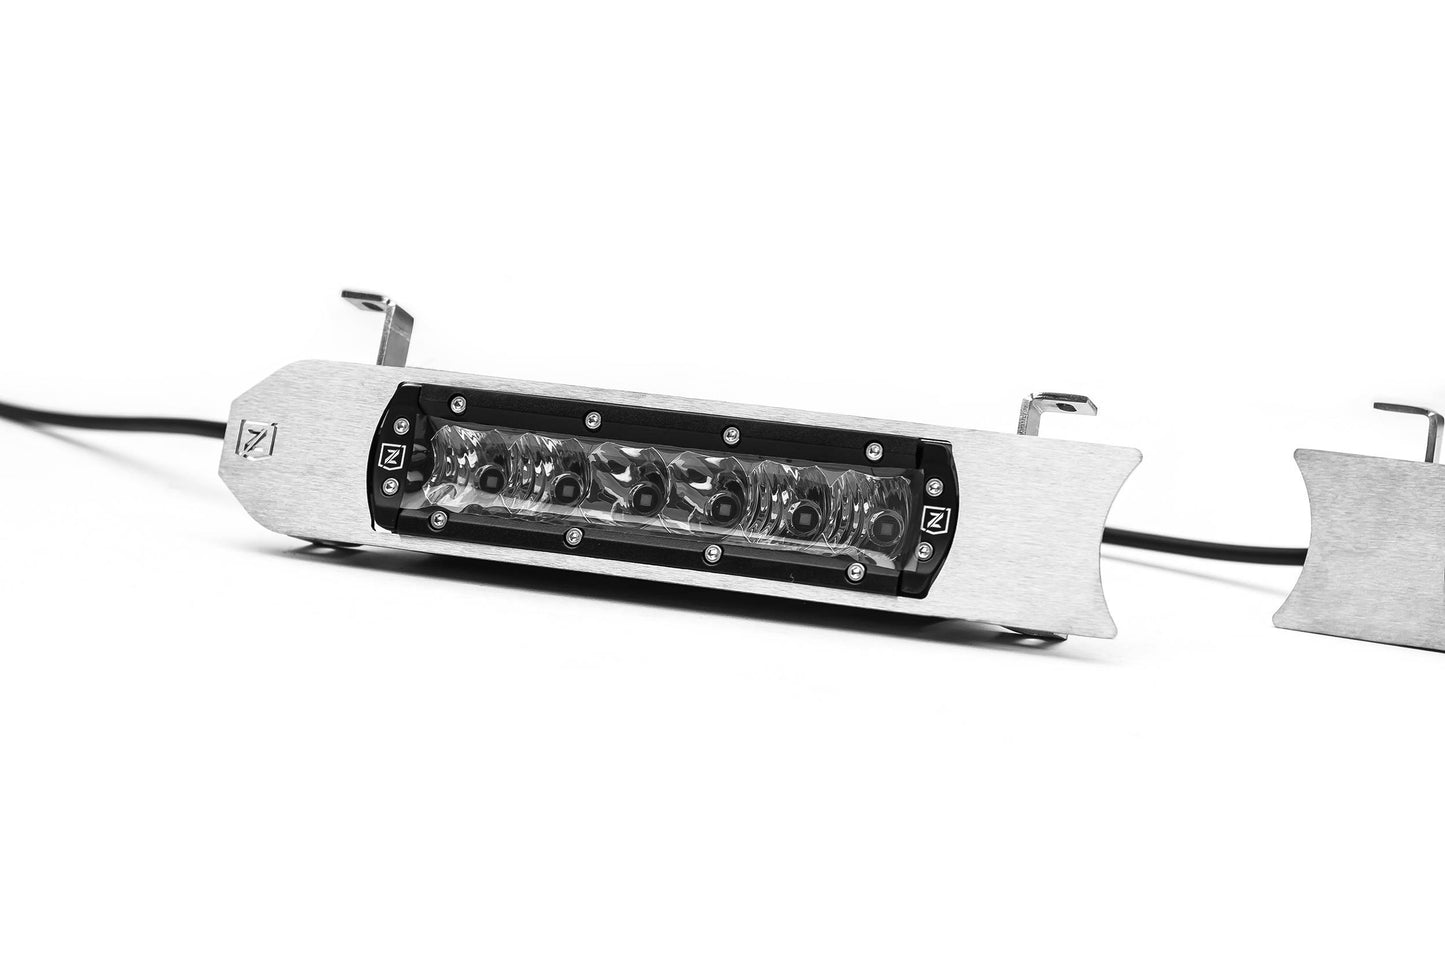 ZROADZ Z415473-KIT Brushed Stainless Steel OEM Grille LED Kit Fits 2017-2019 Ford F-250 Lariat F-250 King Ranch F-350 Lariat F-350 King Ranch F-450 Lariat F-450 King Ranch F-550 Lariat F-550 King Ranch